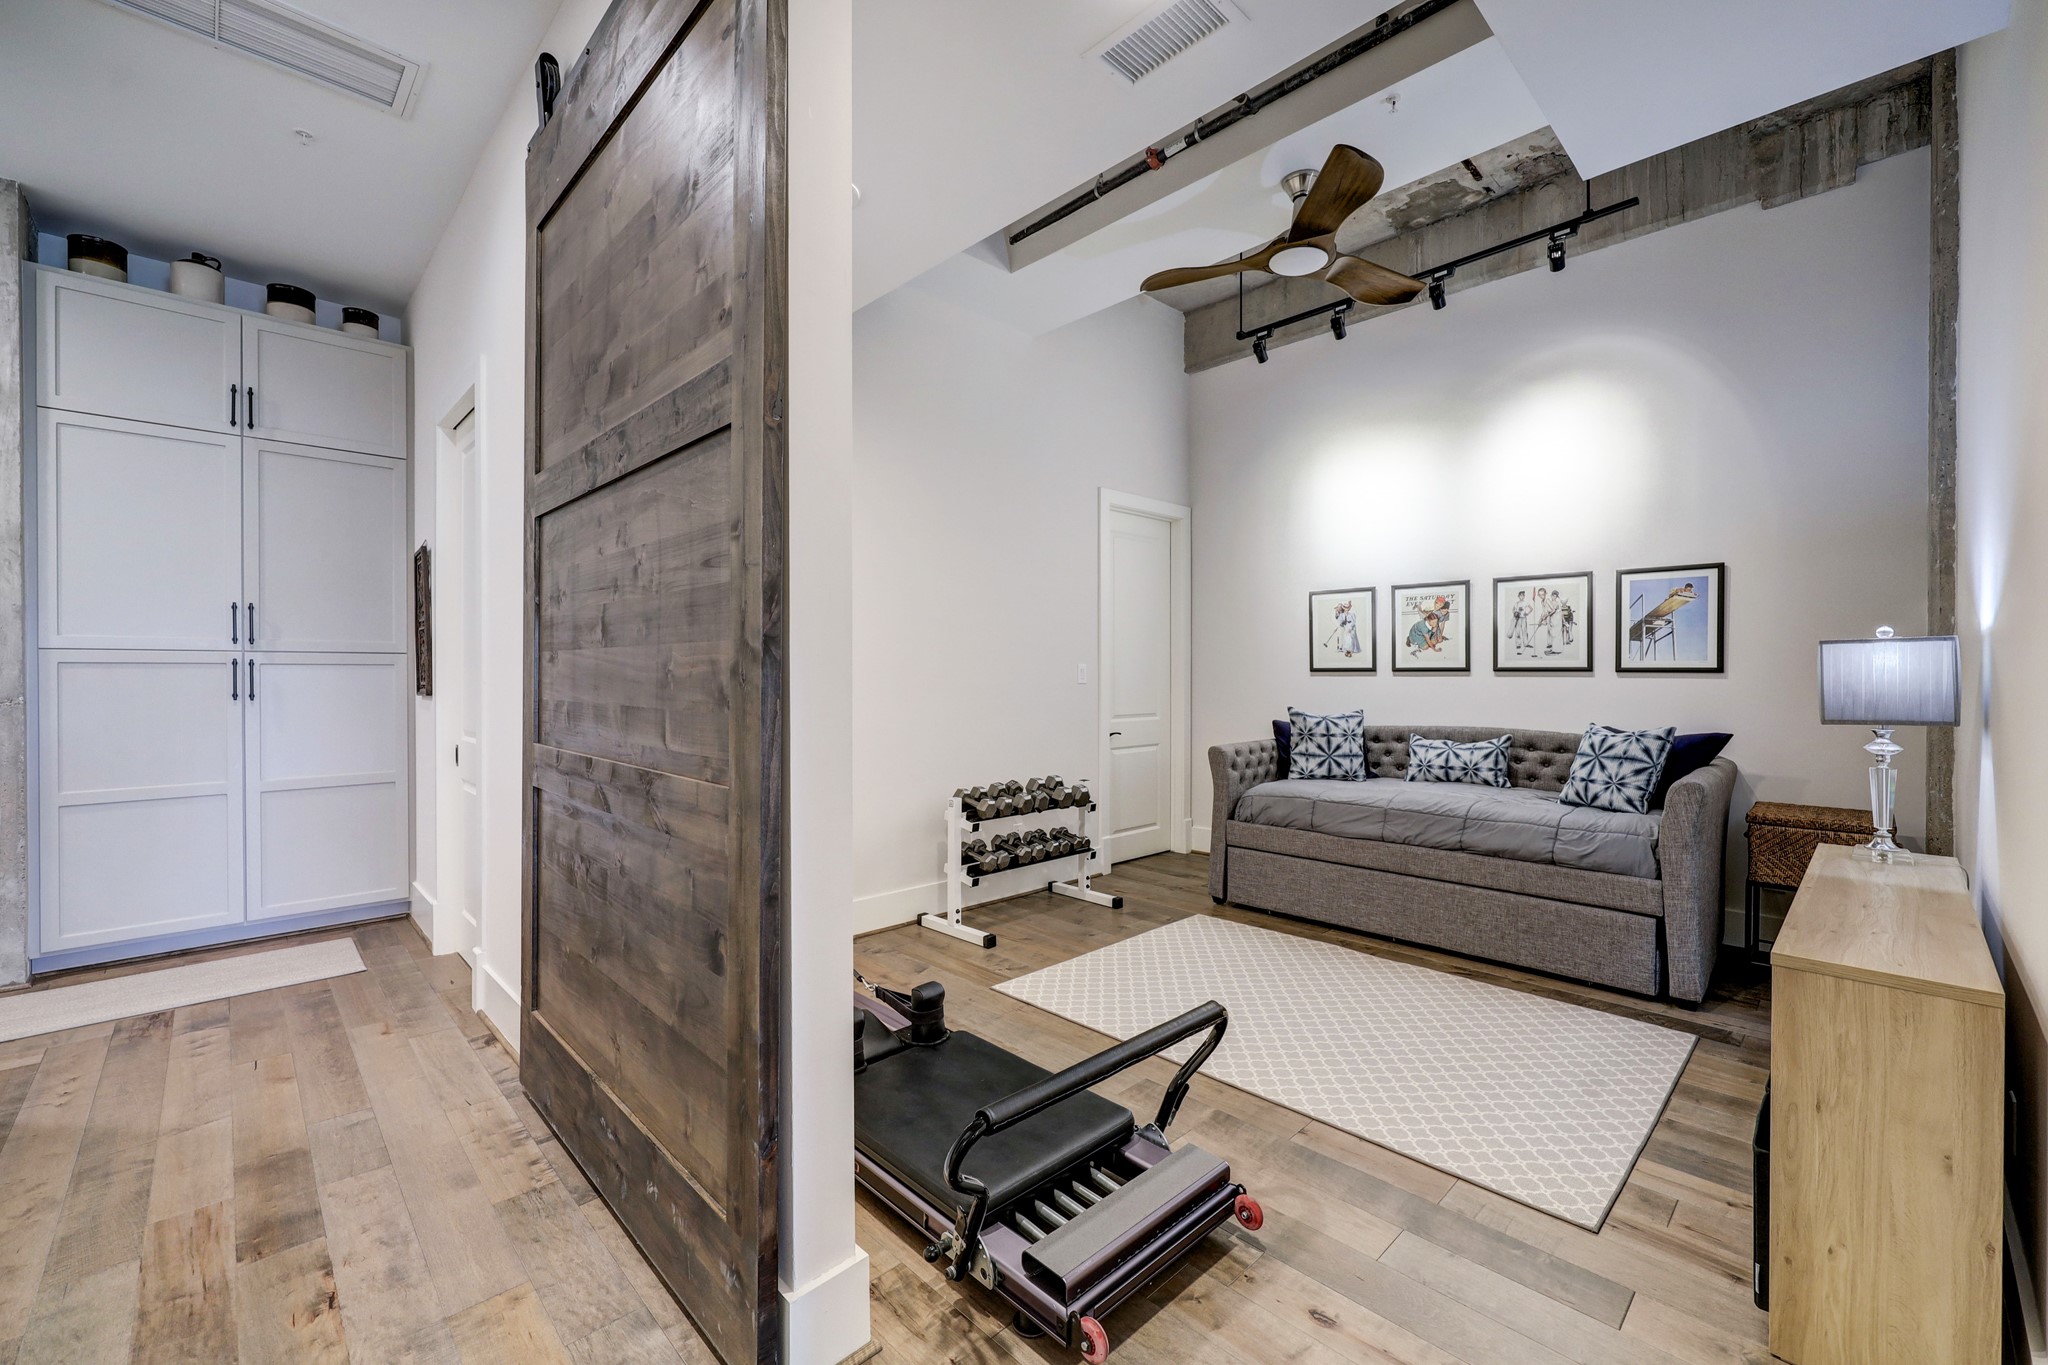 An attractive barn door leads you into the secondary bedroom which features an exposed original concrete beam, engineered hardwood floors, lighting and ceiling fan.